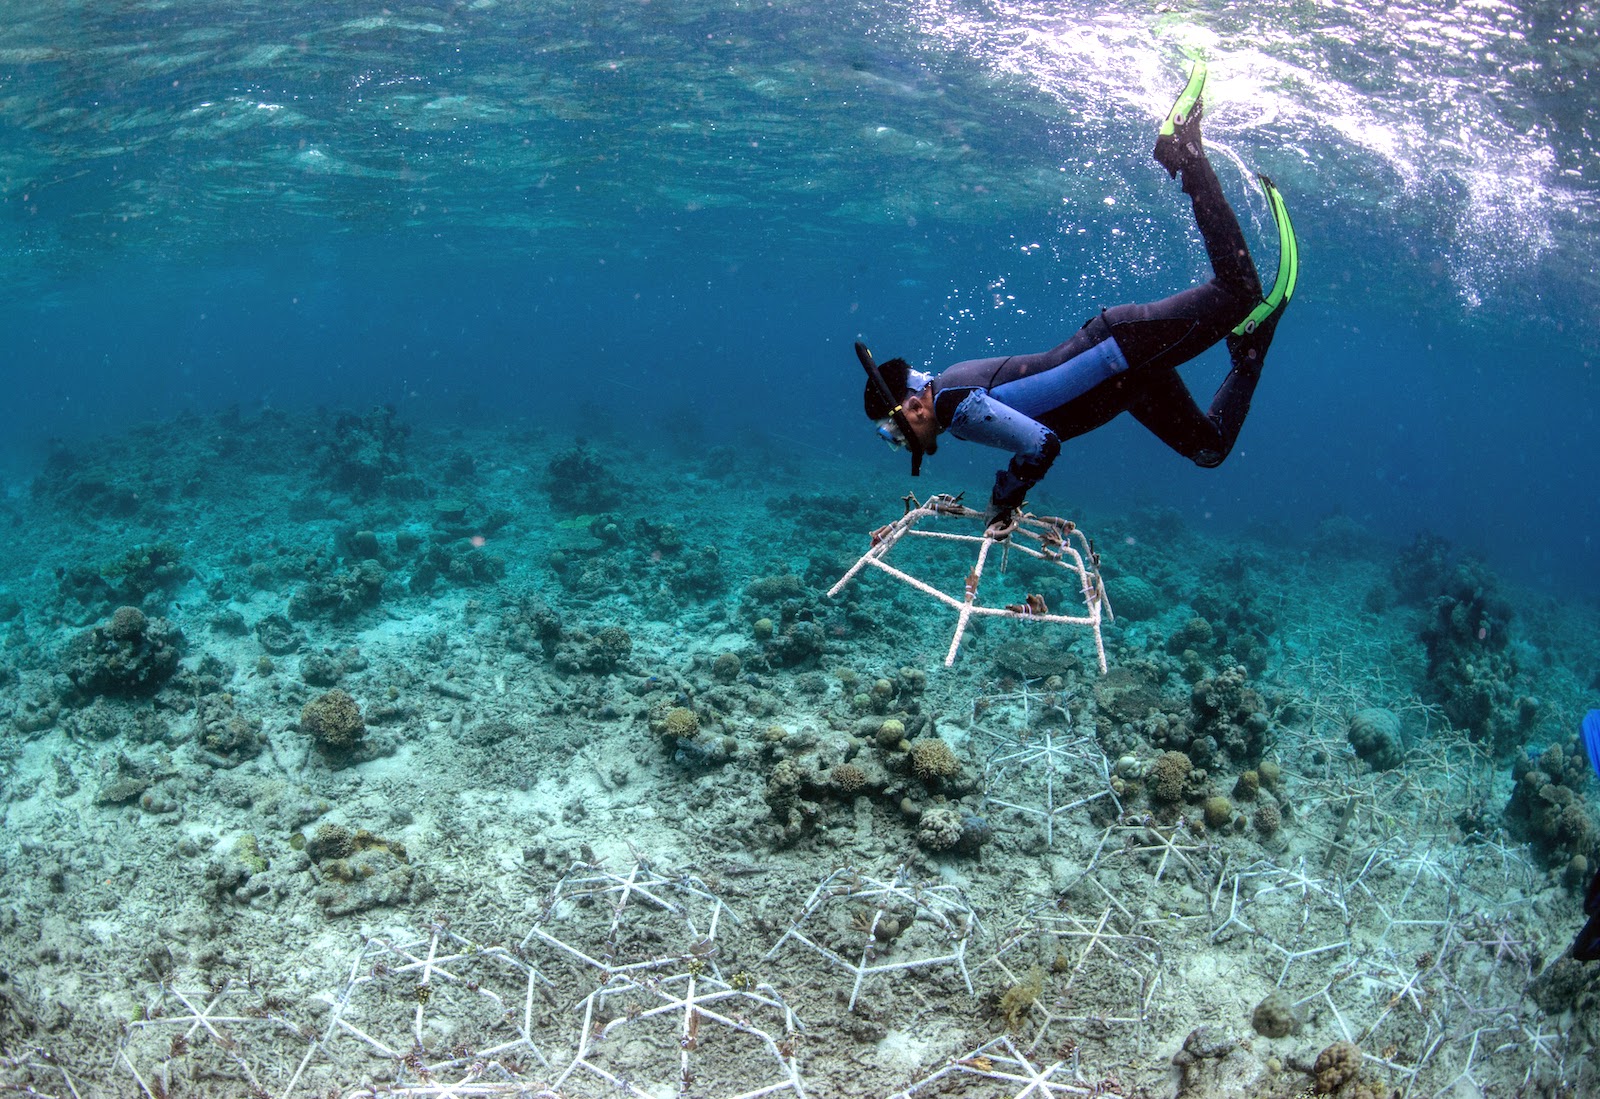 A diver installs a reef stars in a degraded coral reef